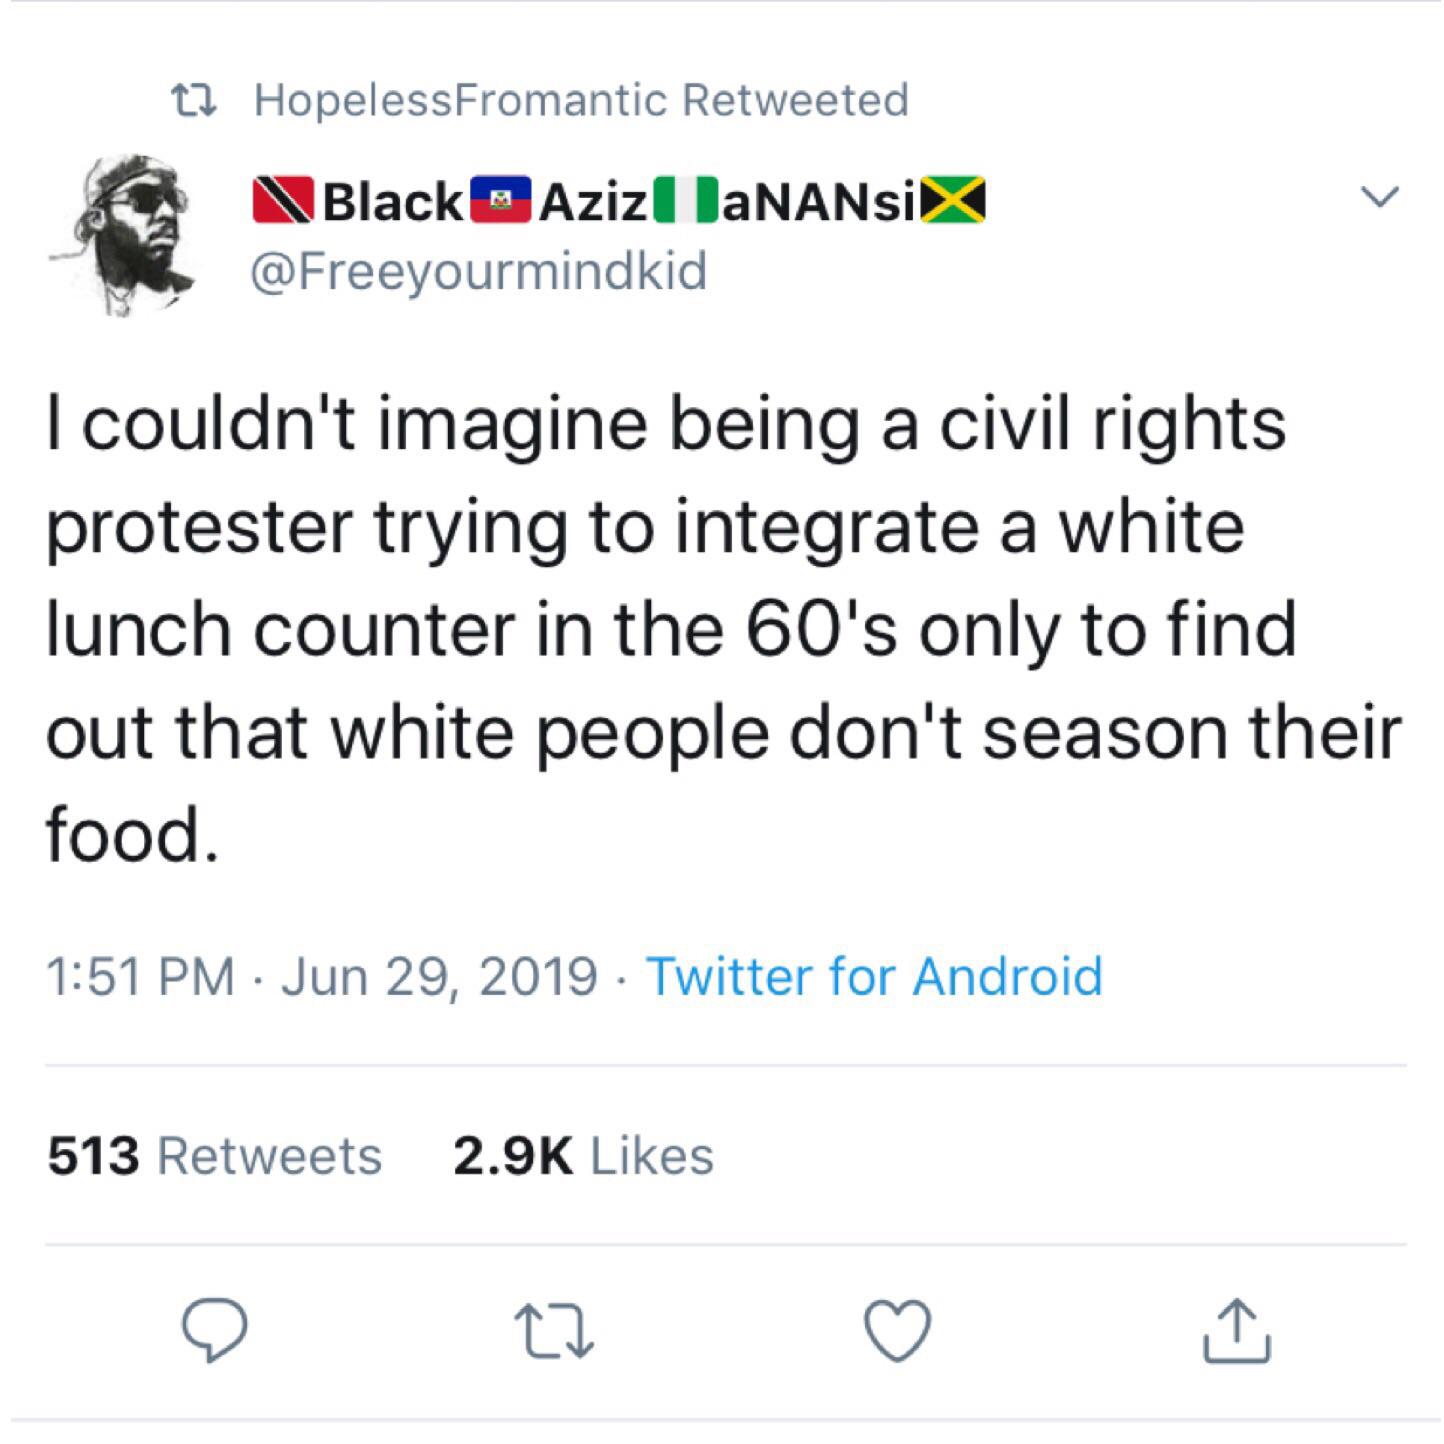 black twitter - I couldn't imagine being a civil rights protester trying to integrate a white lunch counter in the 60's only to find out that white people don't season their food.